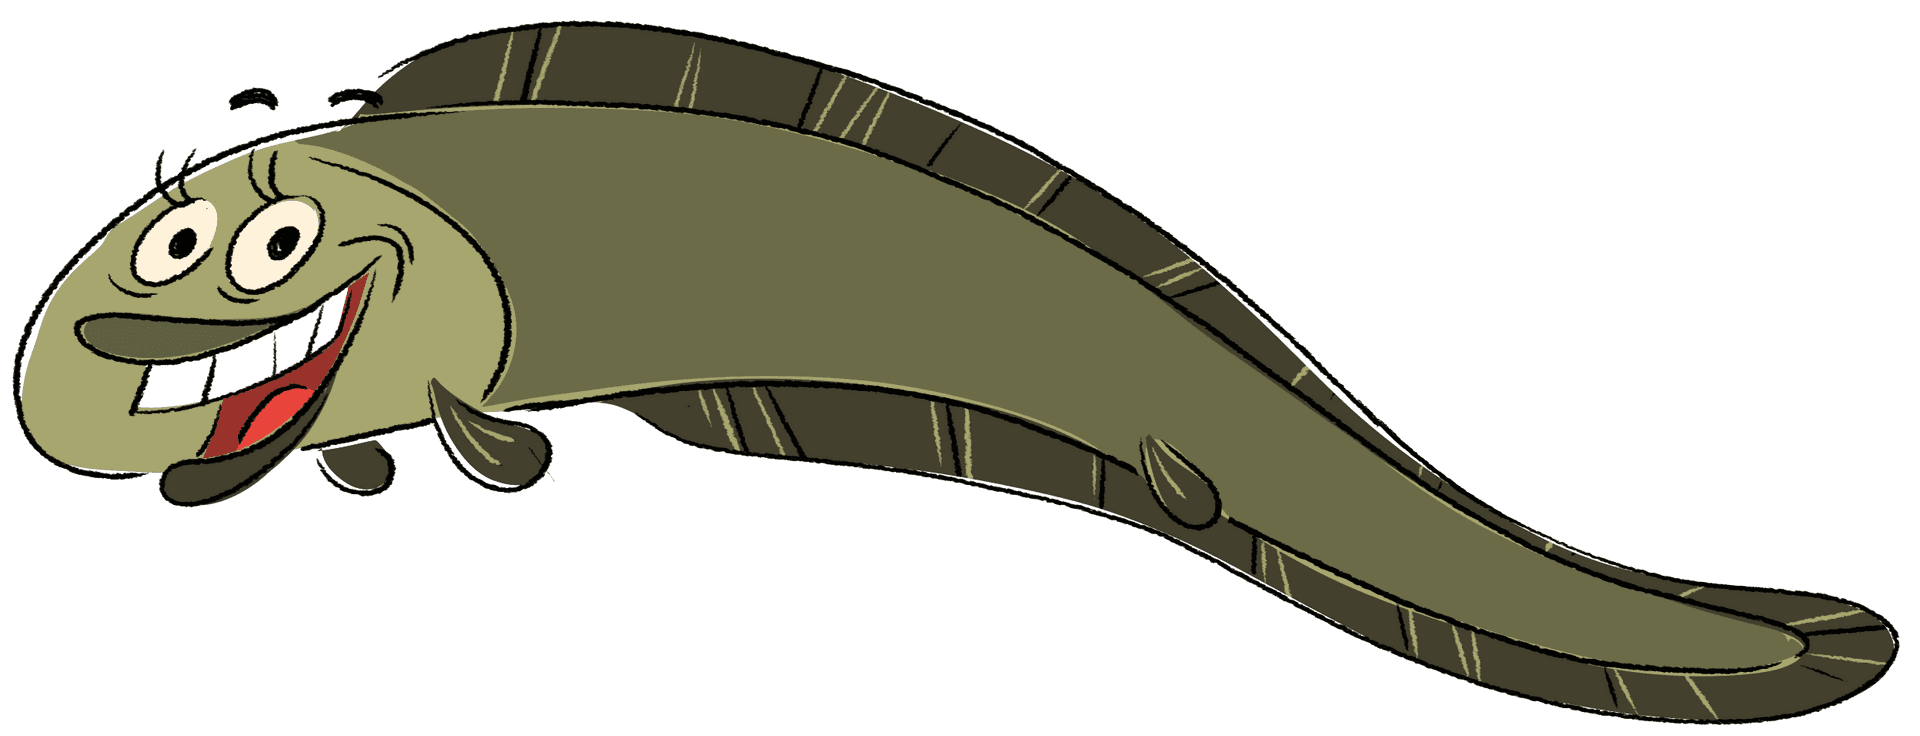 Animated Smiling Eel Cartoon Character PNG image